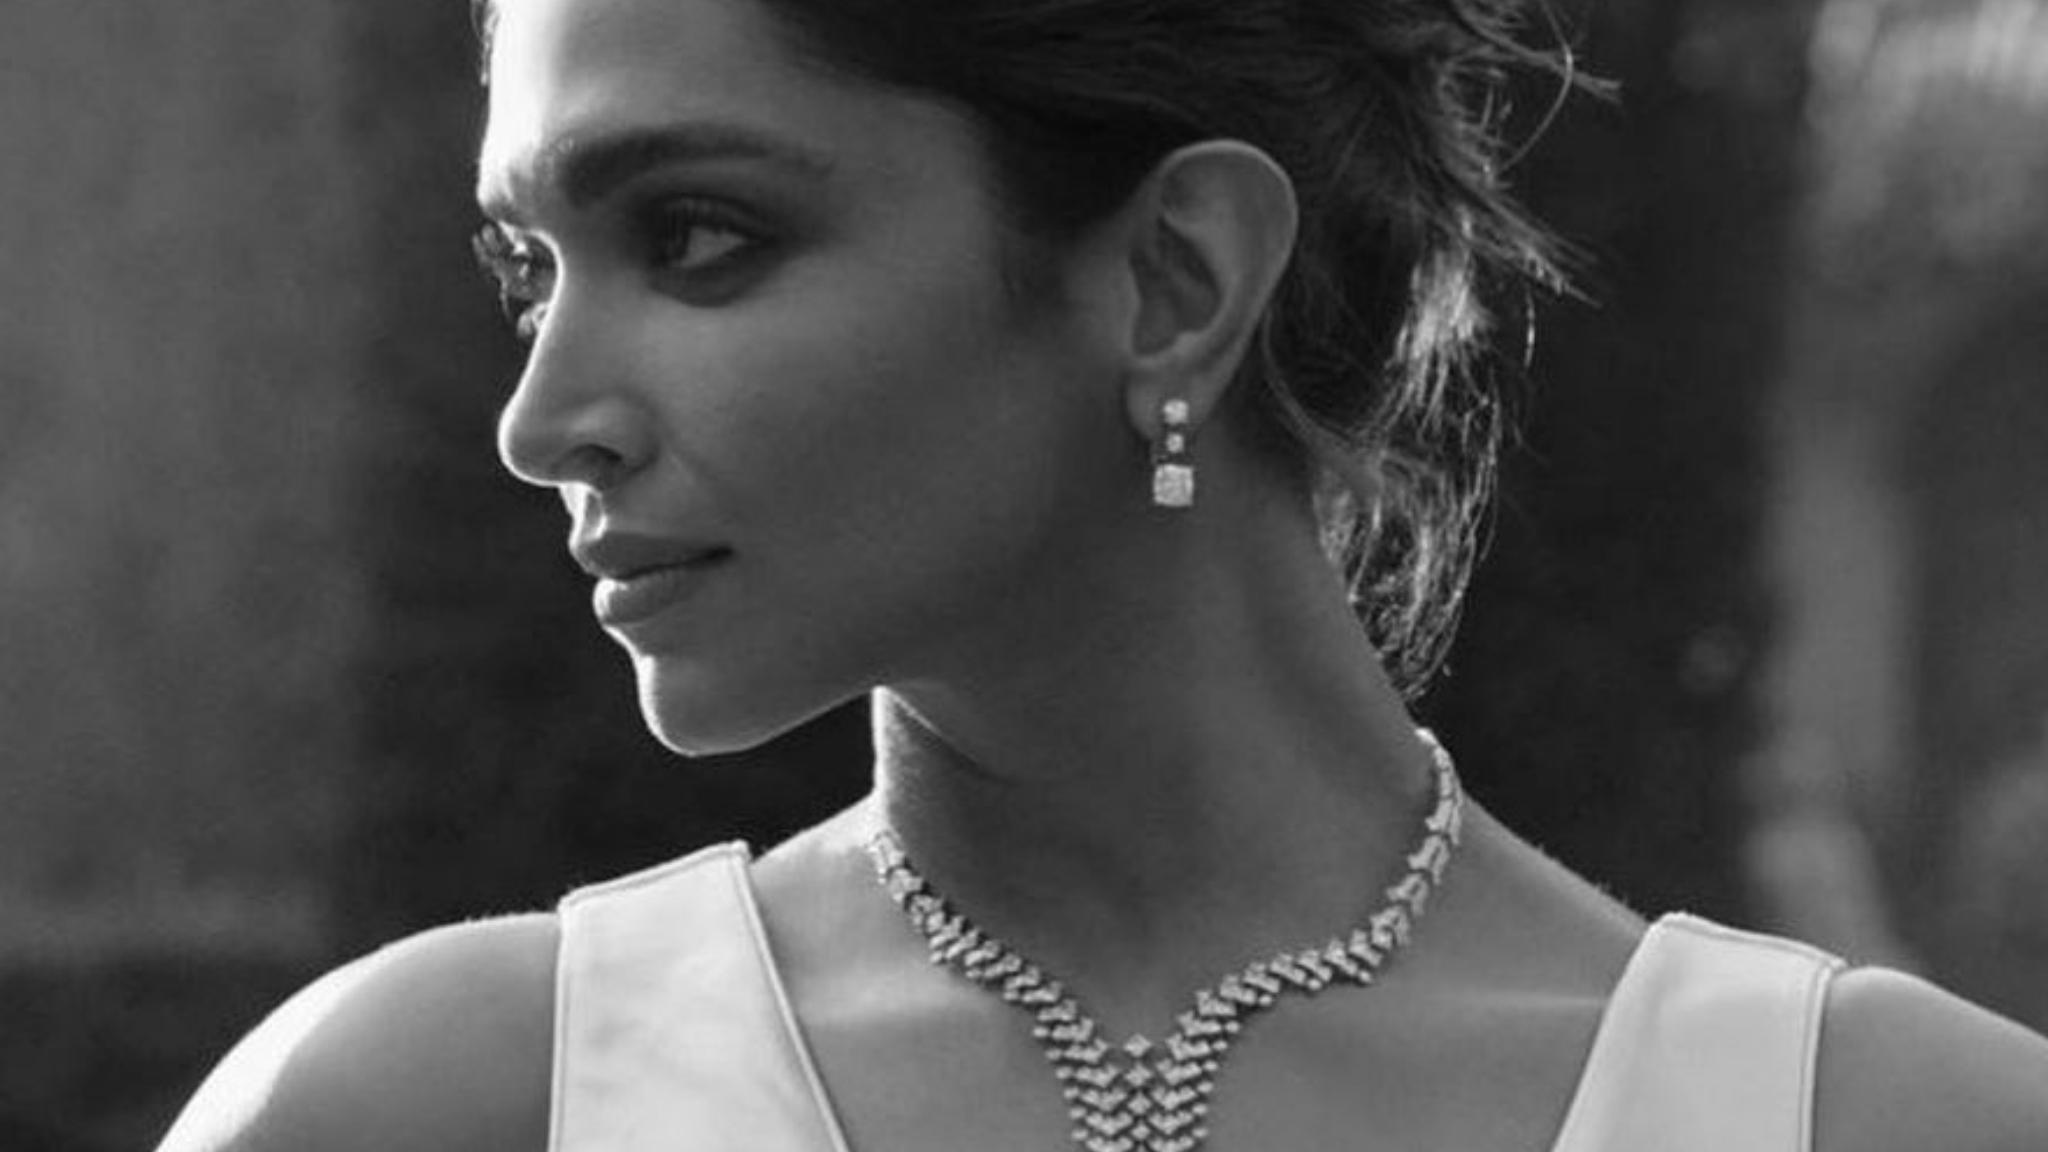 Deepika Padukone stuns in her first-ever campaign for Cartier as a